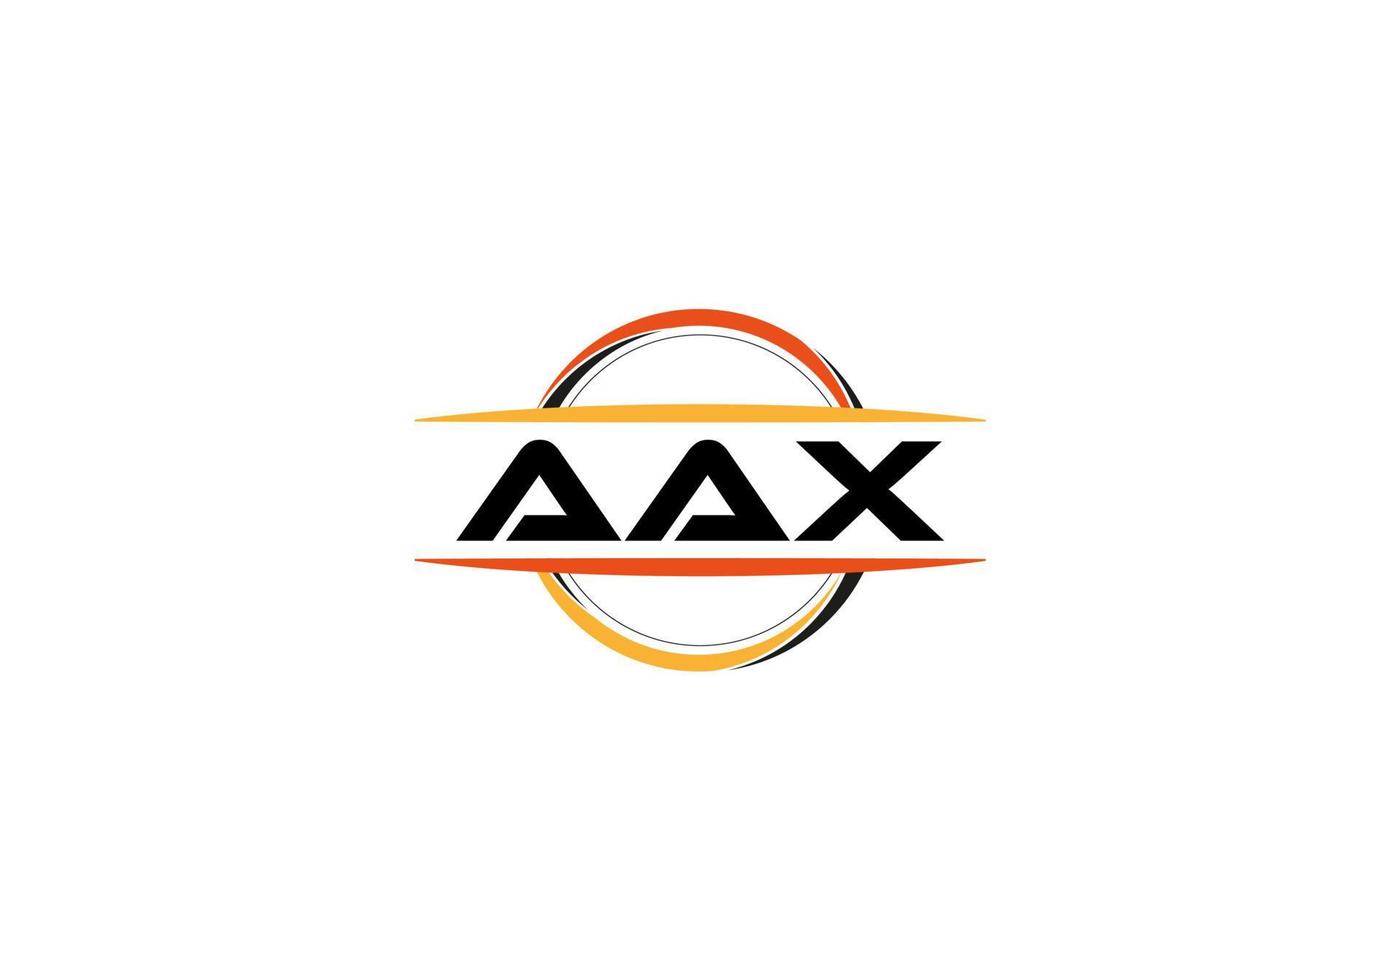 AAX letter royalty mandala shape logo. AAX brush art logo. AAX logo for a company, business, and commercial use. vector